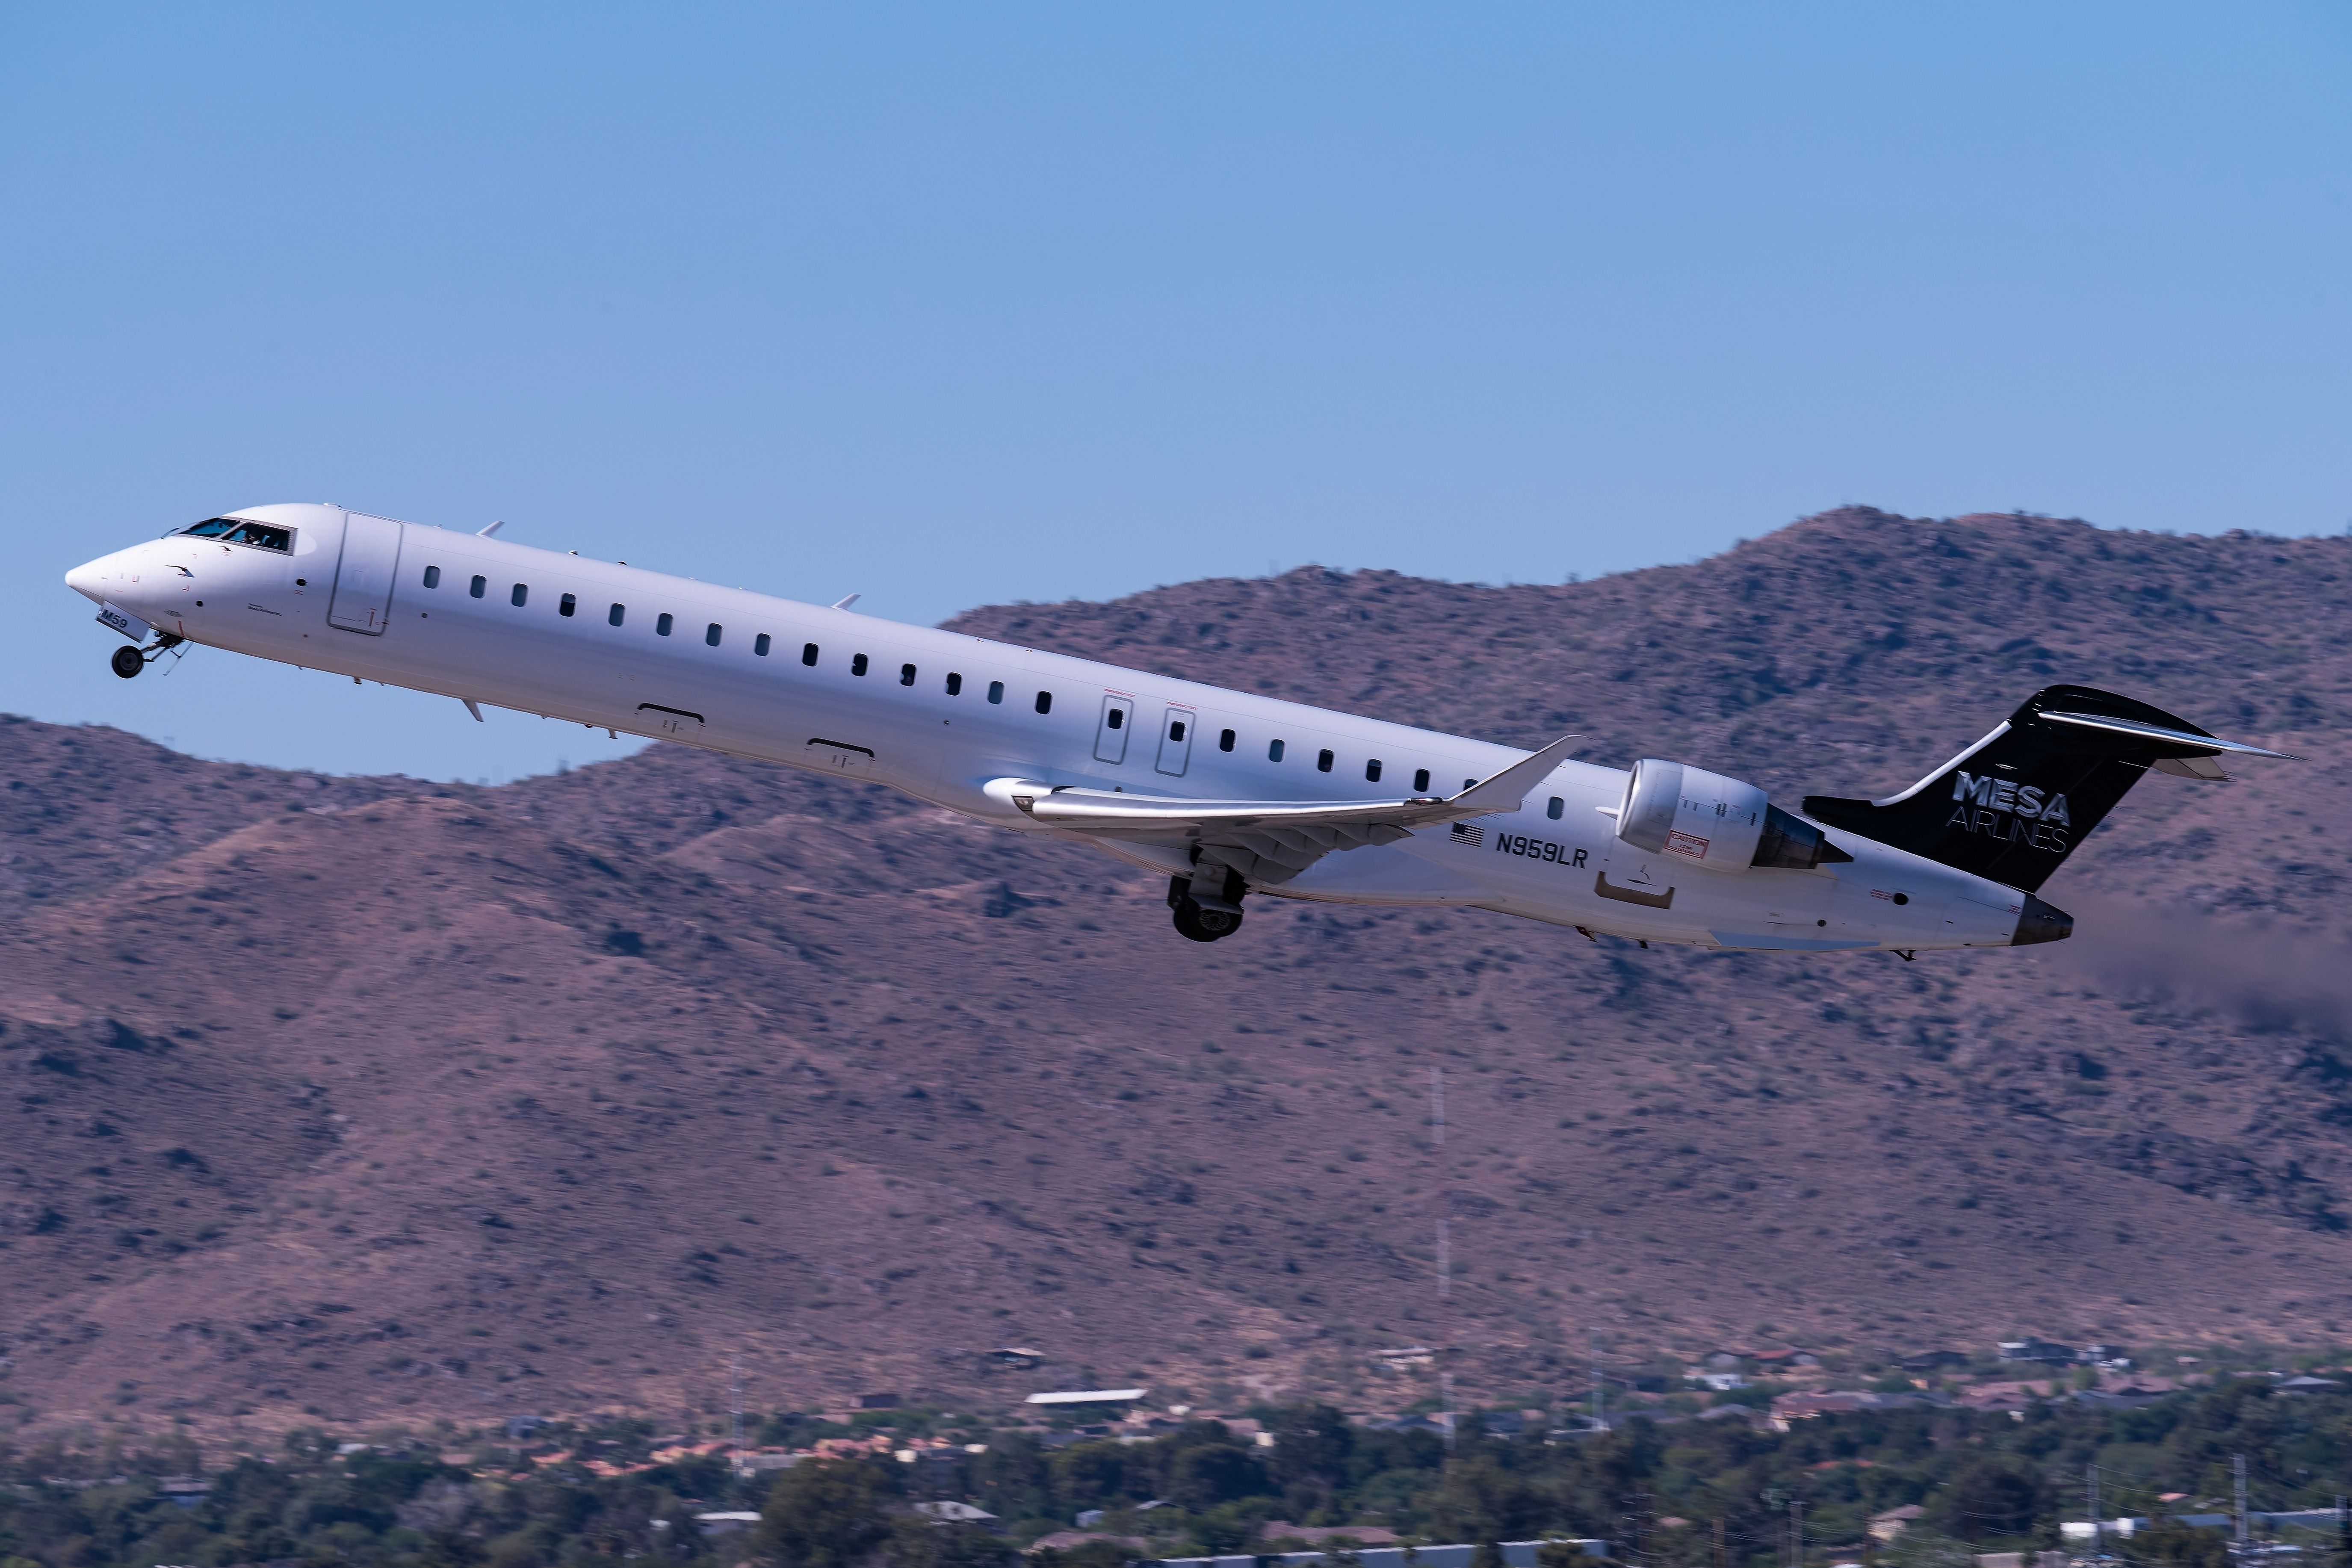 A Mesa Airlines Bombardier CRJ900